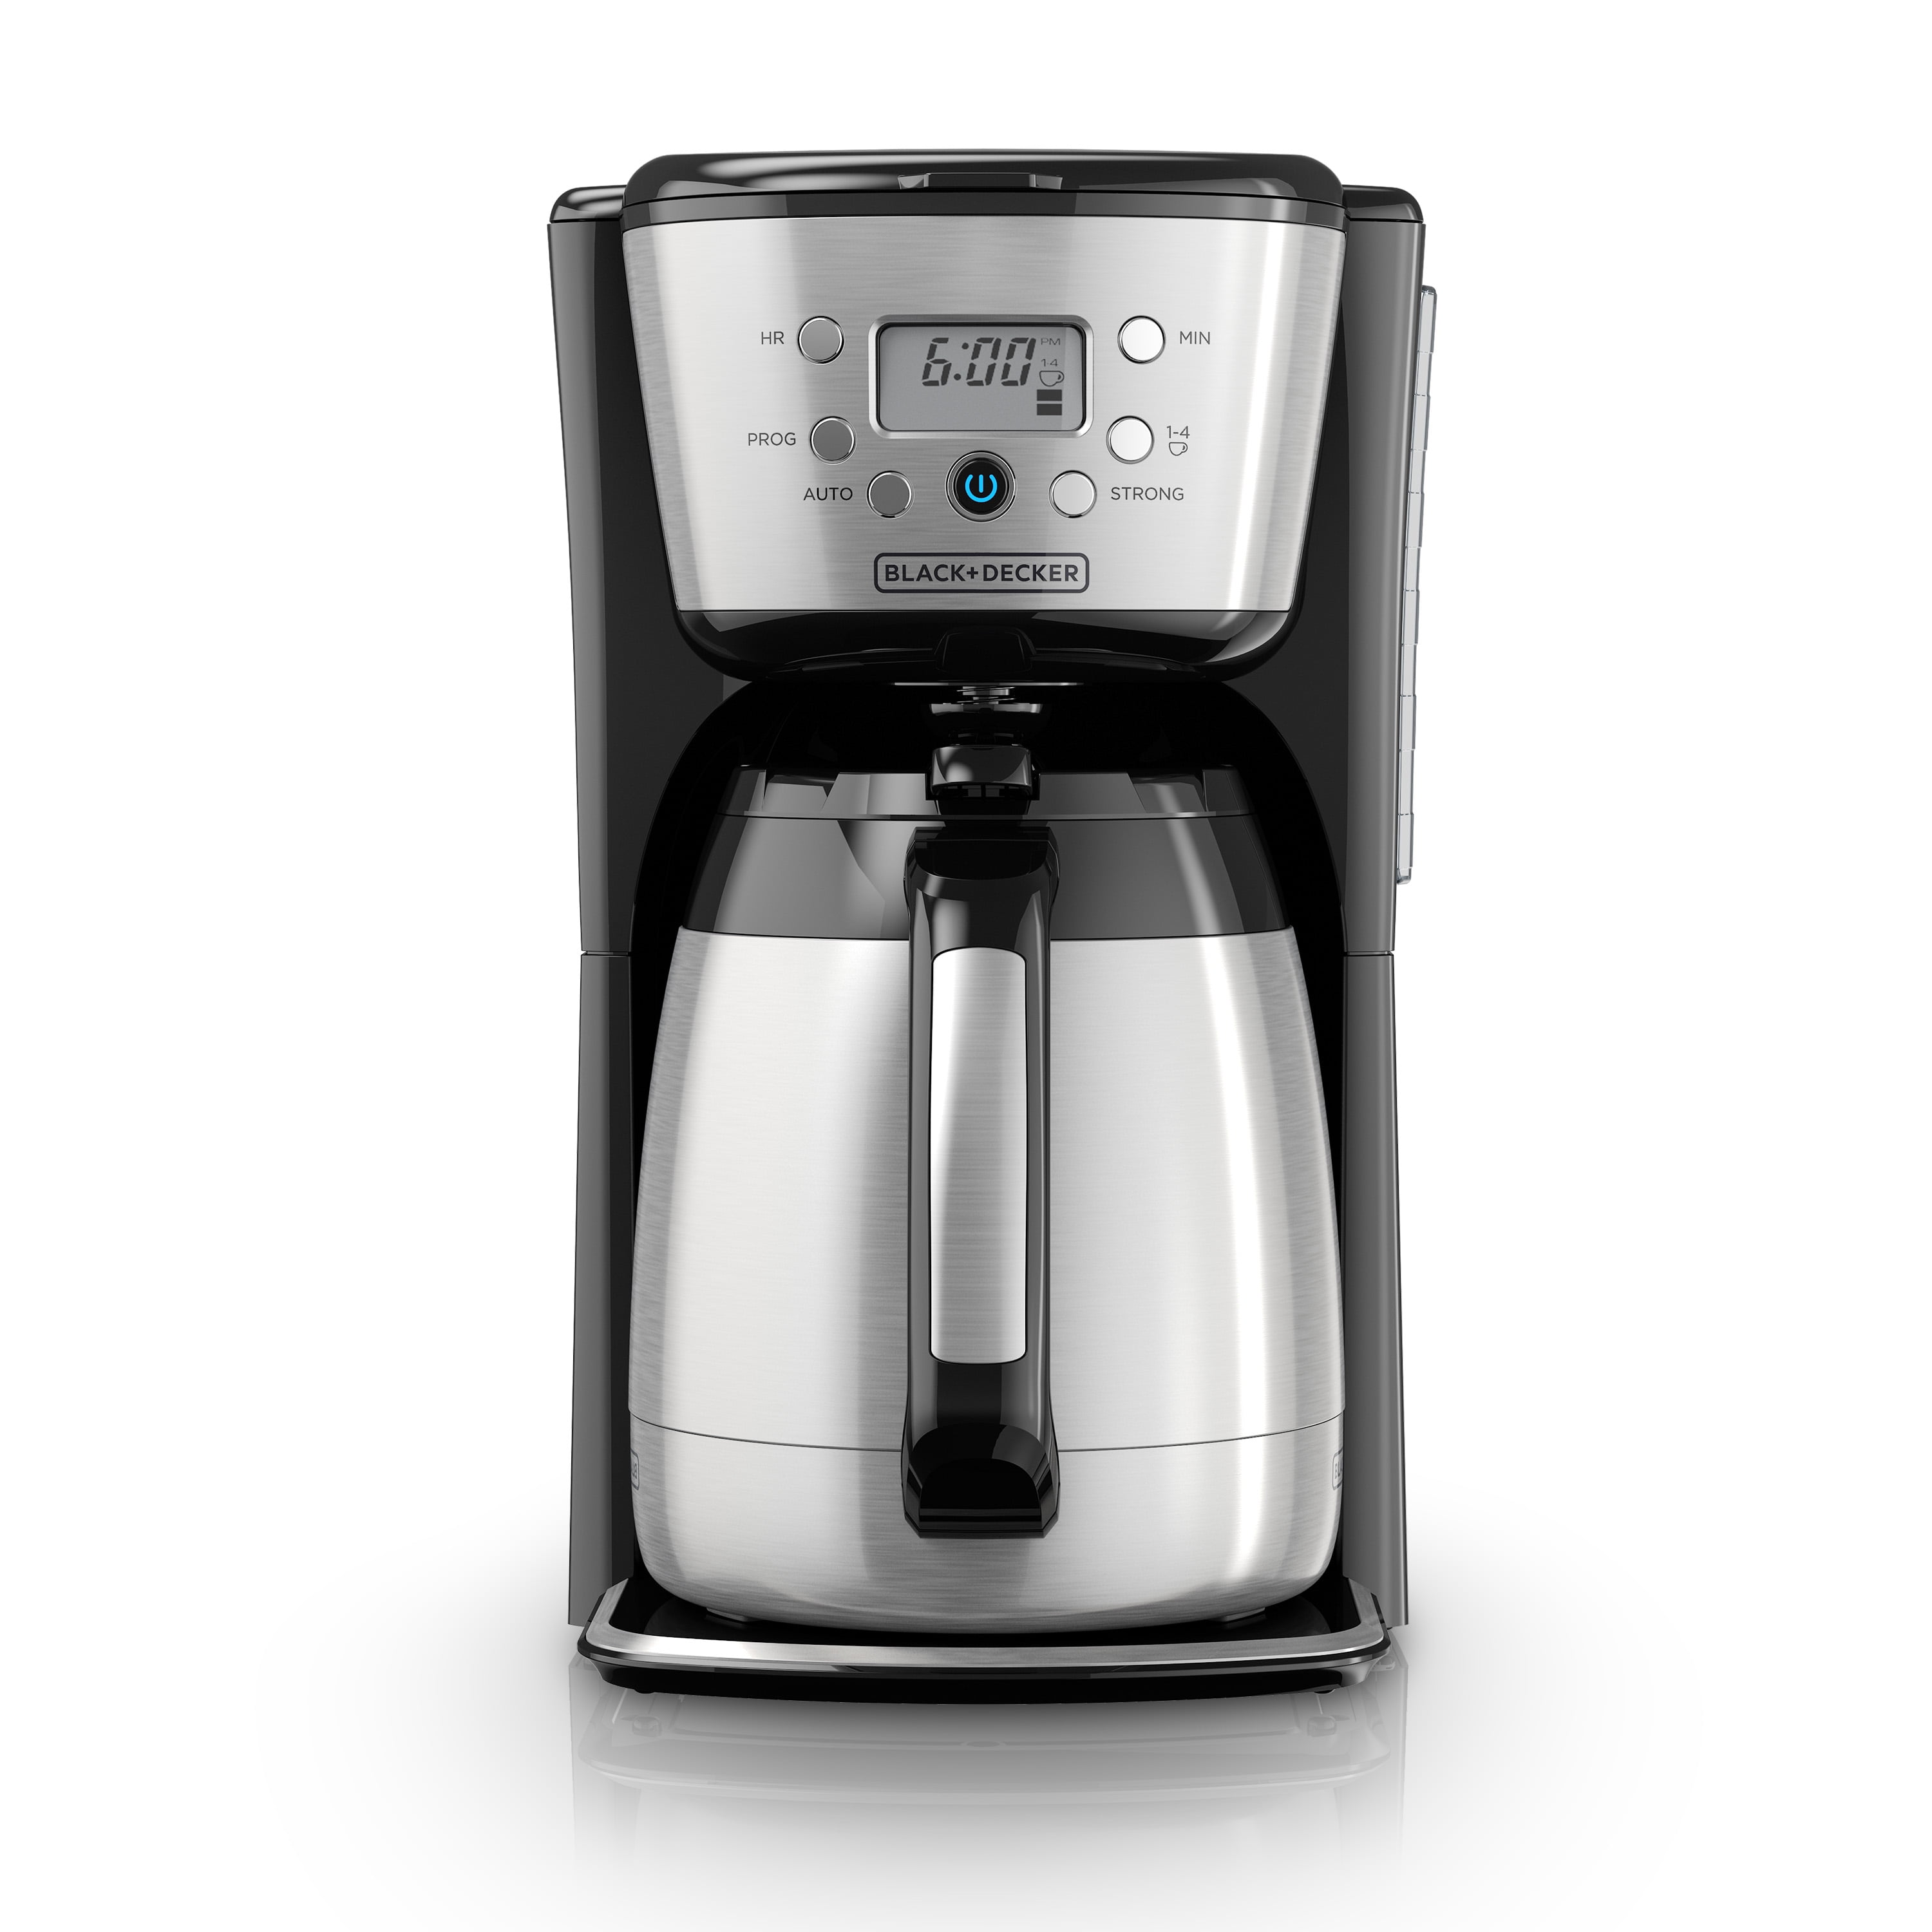  BLACK+DECKER 12 Cup Thermal Programmable Coffee Maker with Brew  Strength and VORTEX Technology, Black/Steel, CM2046S: Home & Kitchen